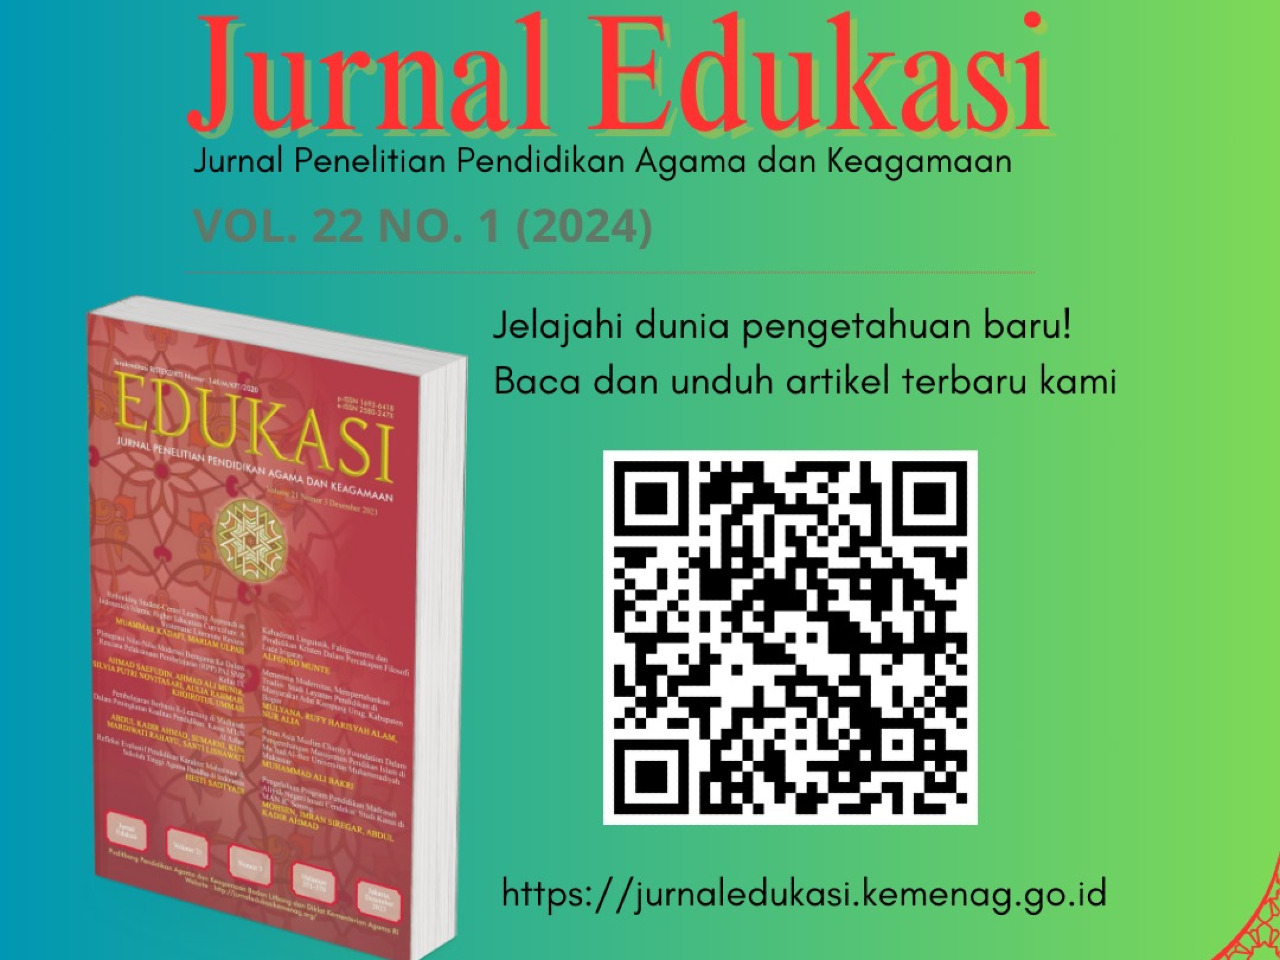 10 Selected Articles Have Been Published in Jurnal Edukasi Vol. 22 No. 1 (2024)